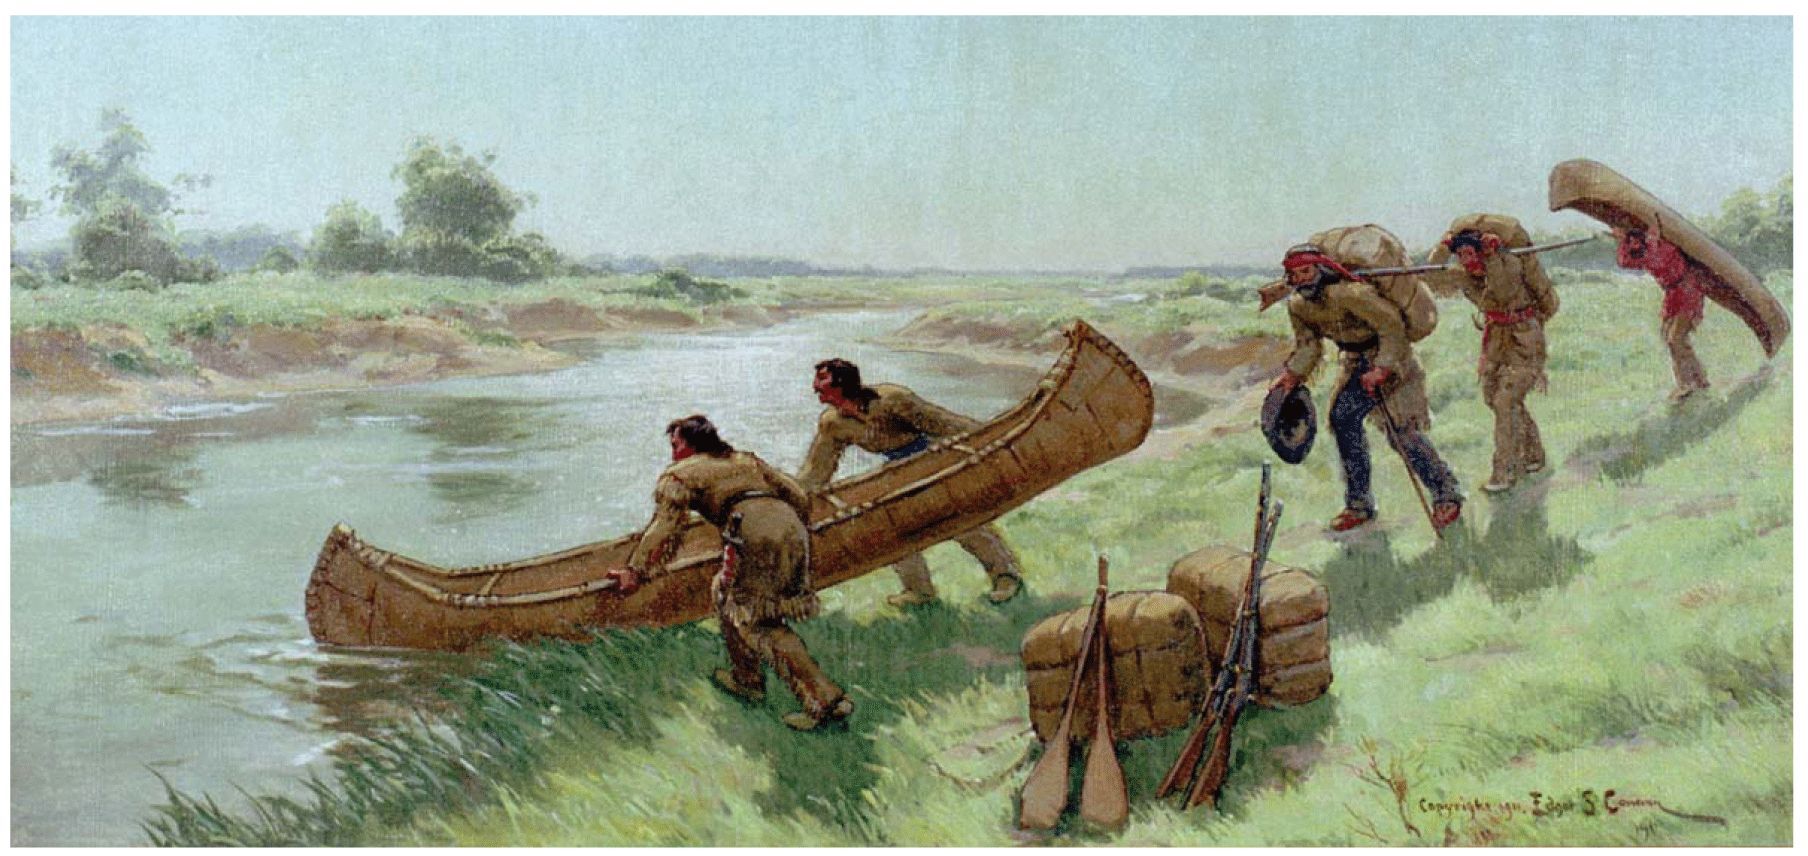 “The Chicago Portage” by Edgar Spier Cameron